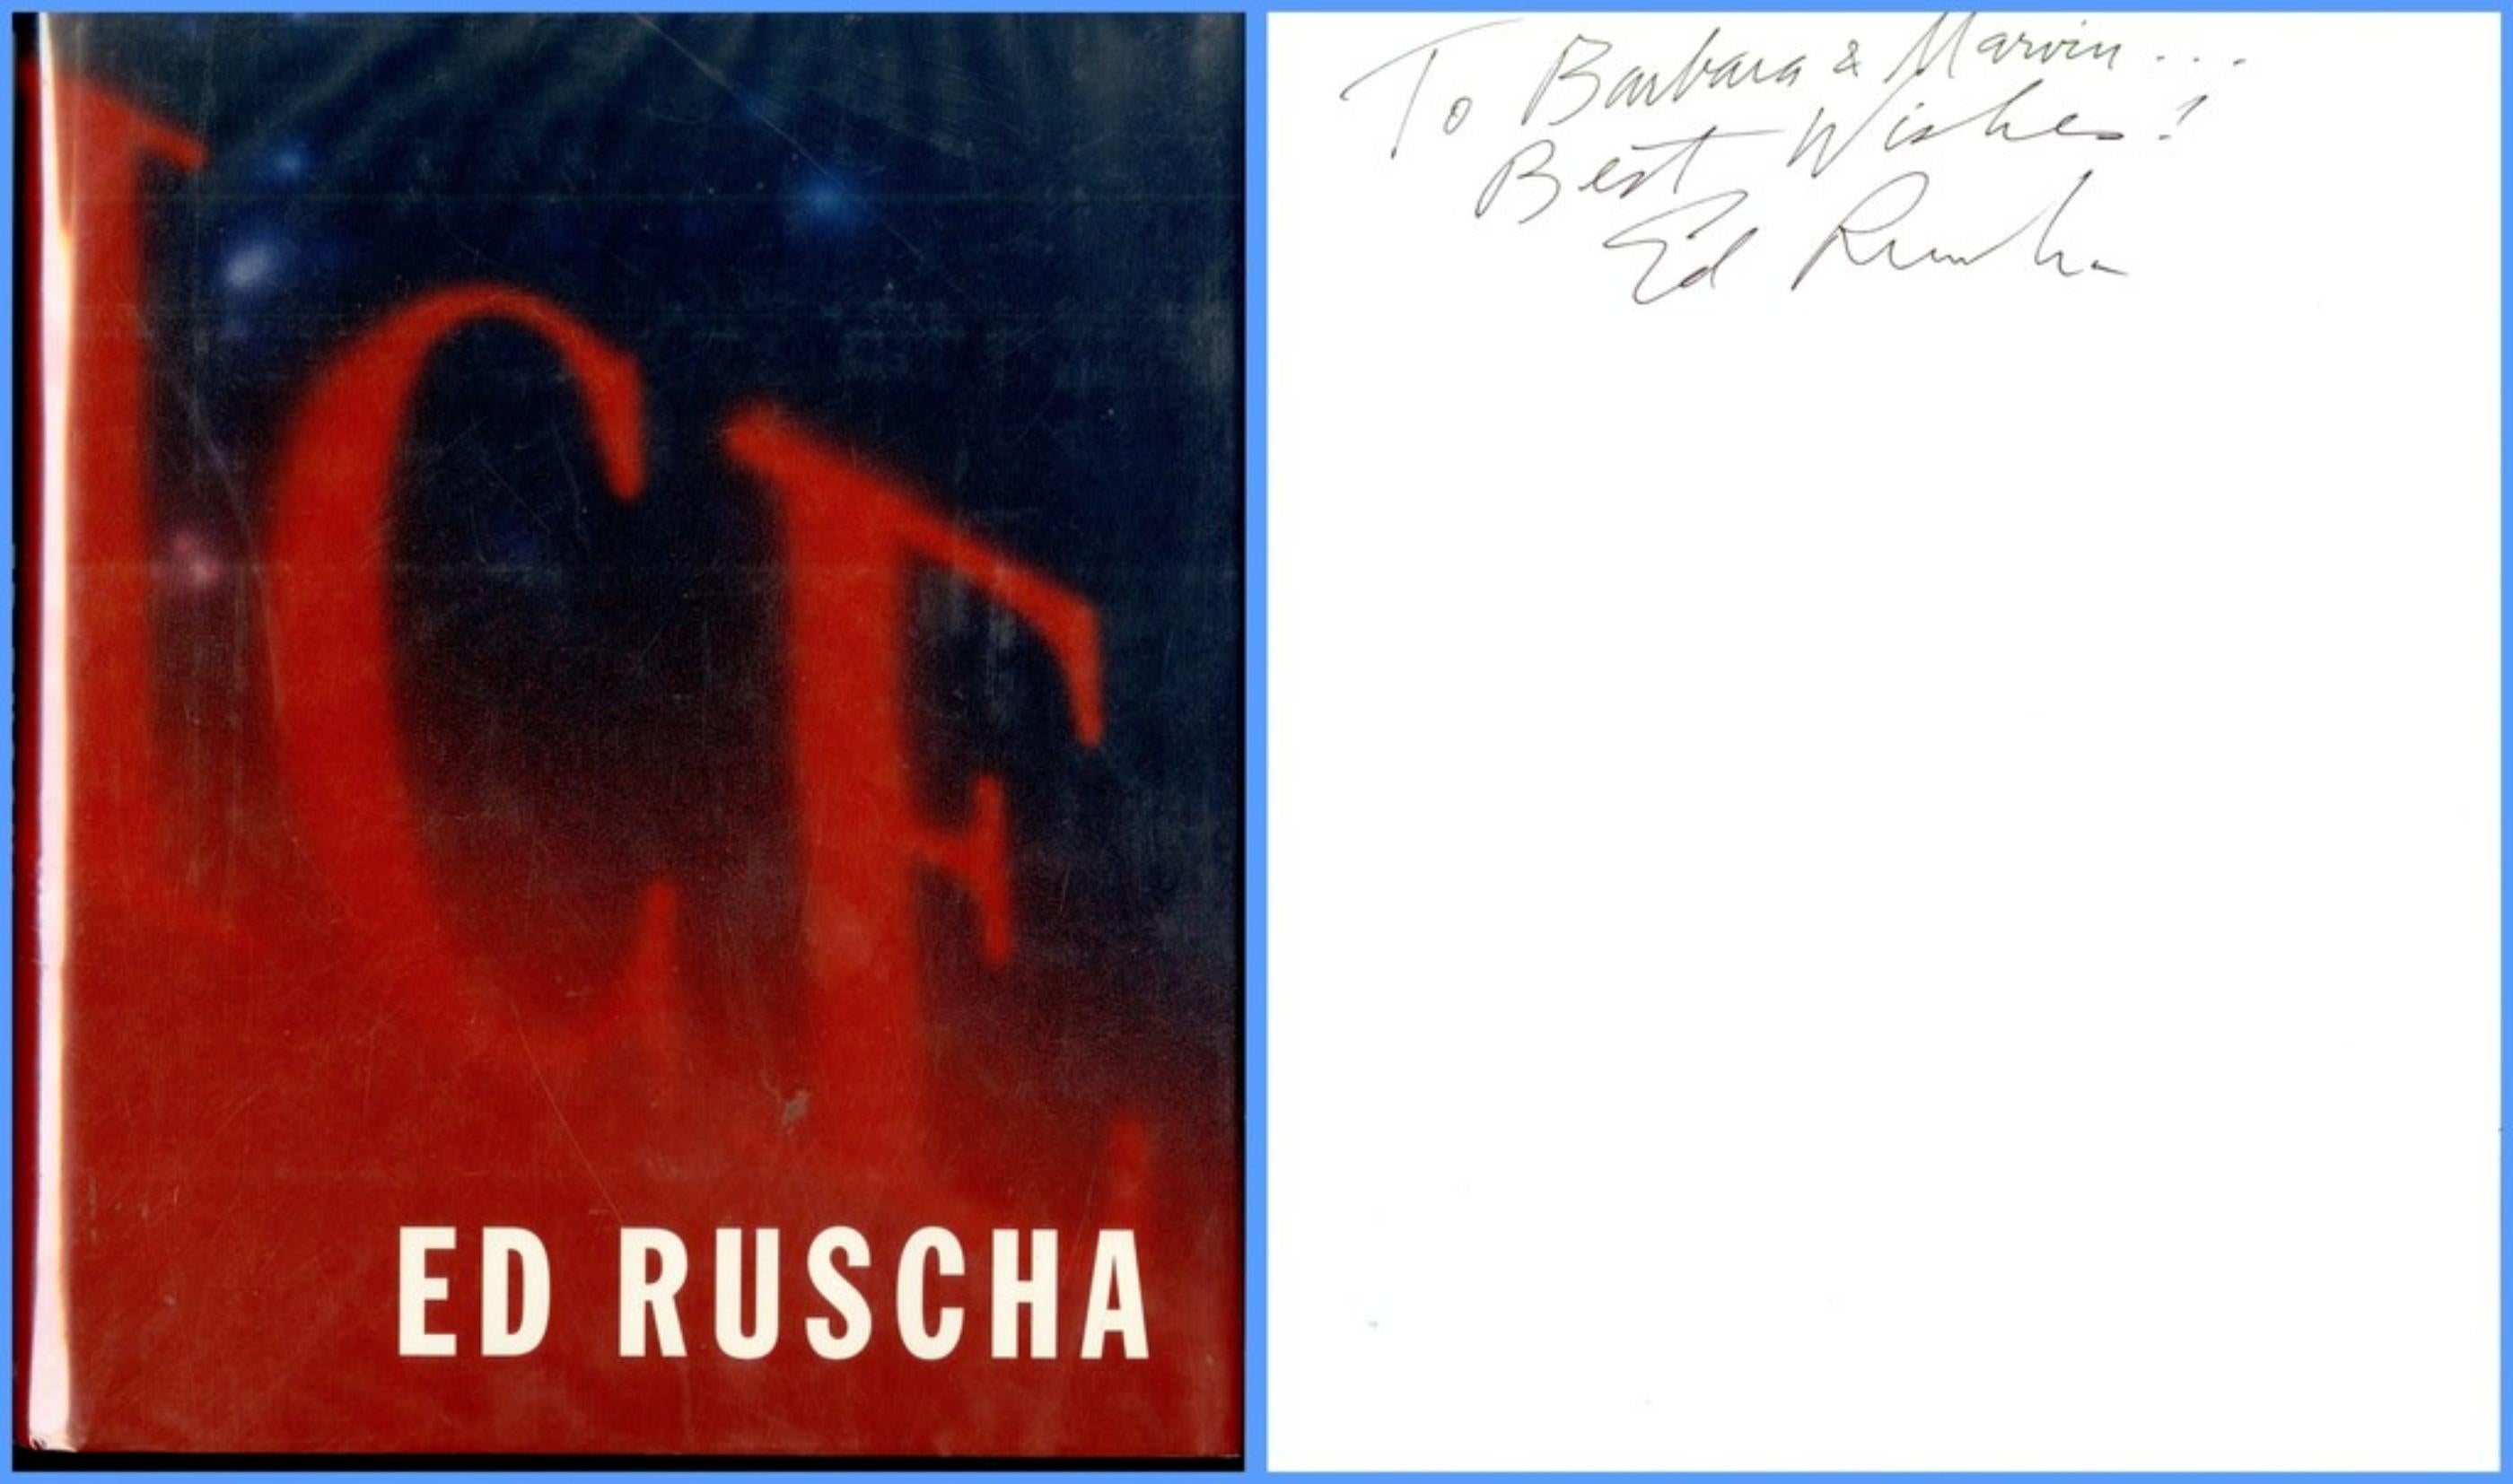 Ed Ruscha, Signed and inscribed to Marvin Davis, ex owner of 20th Century Fox